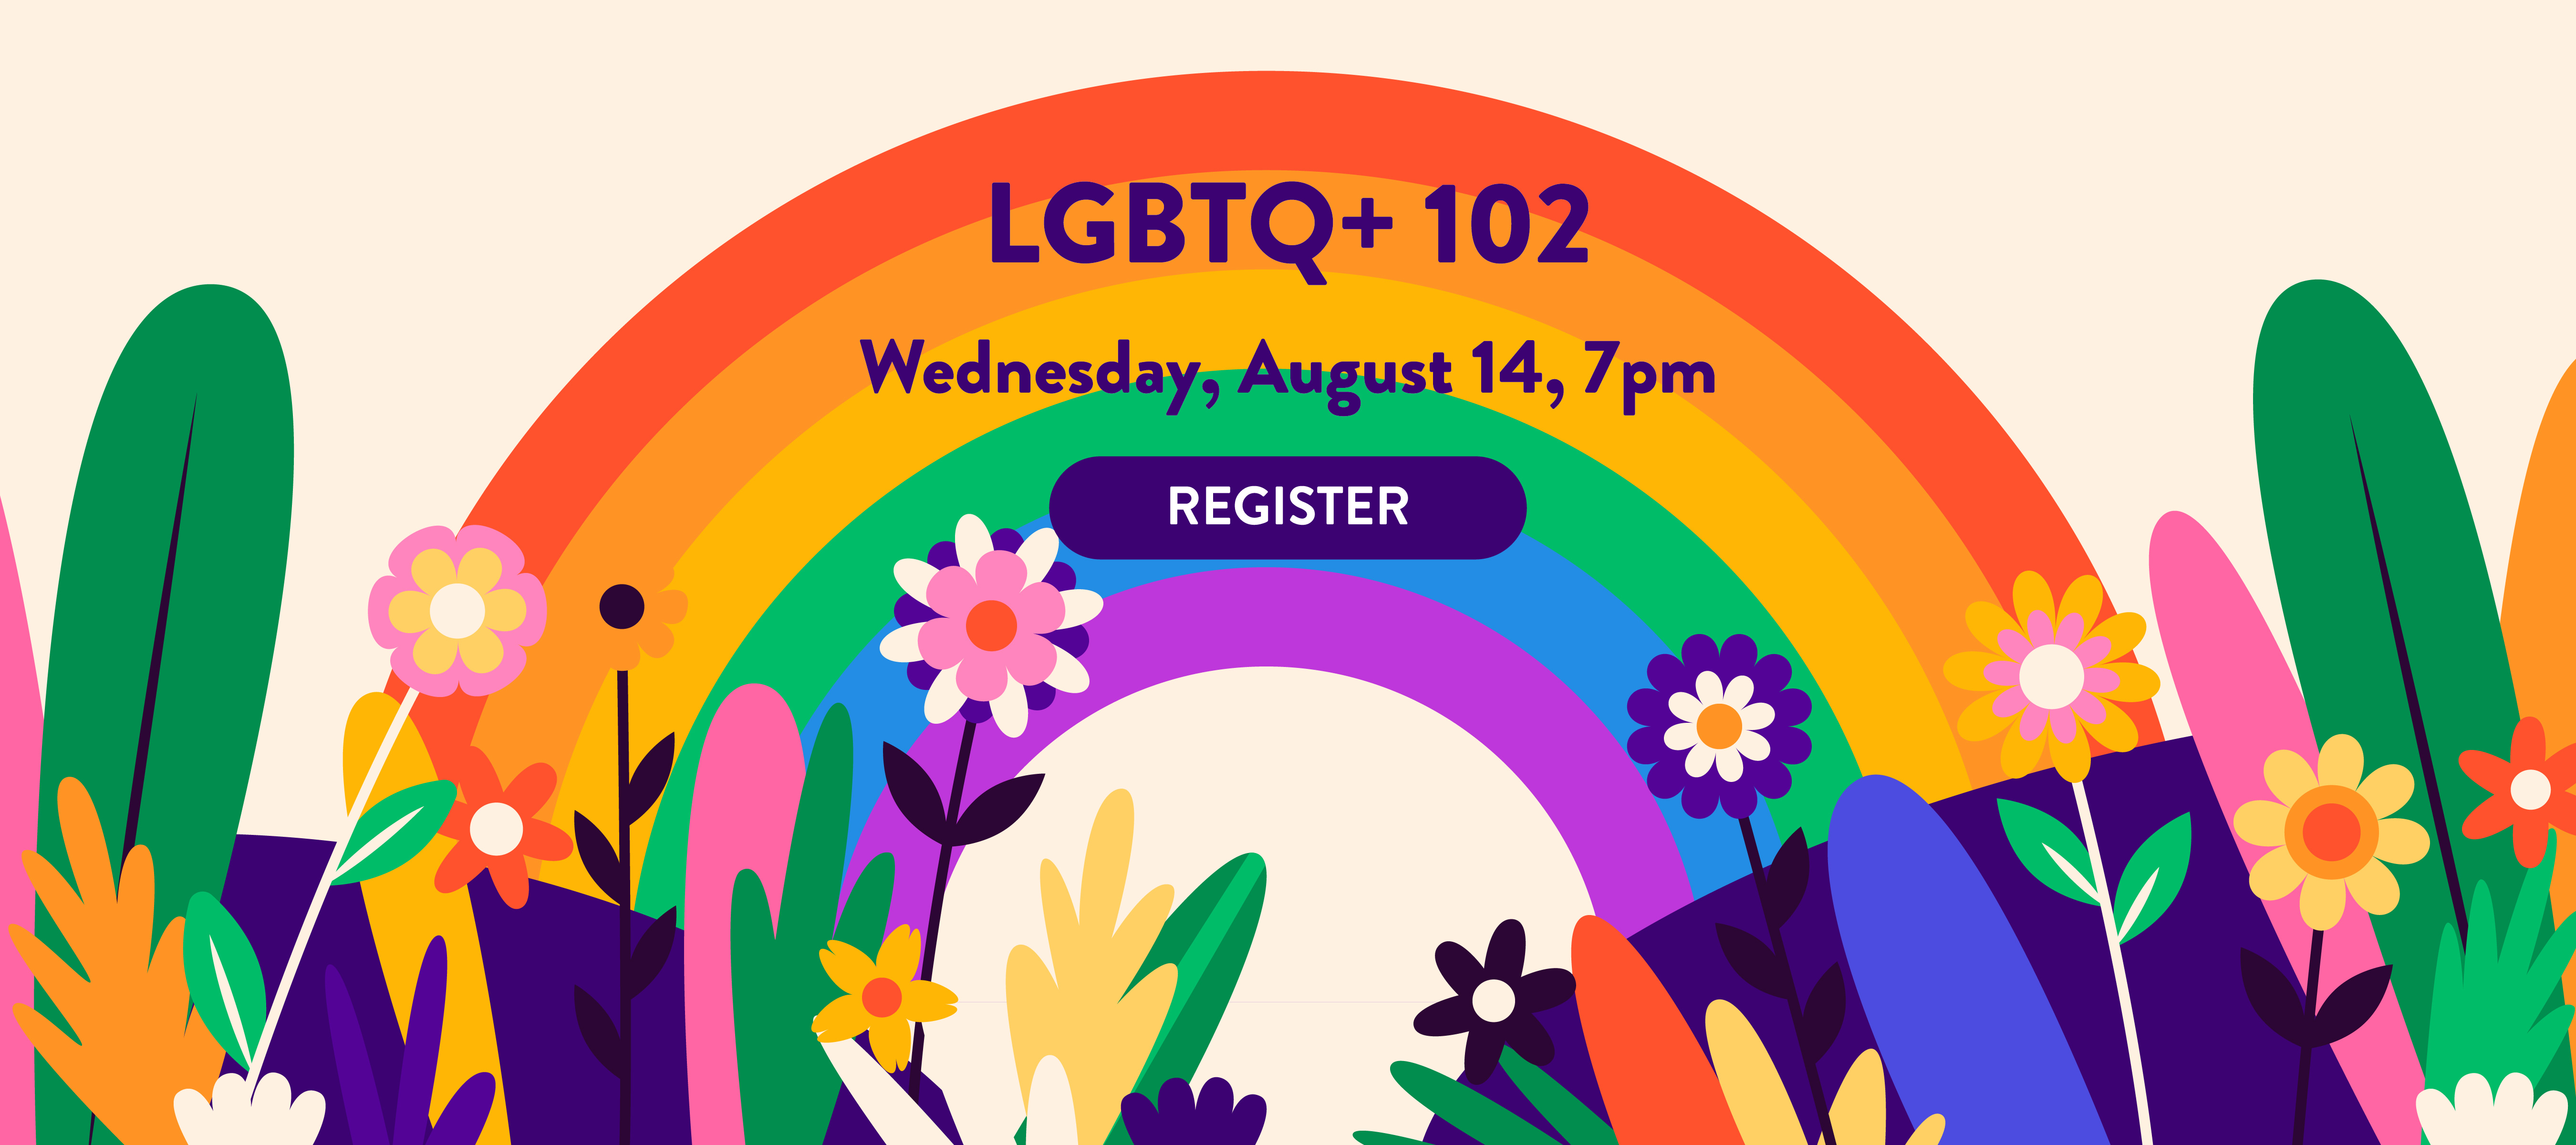 phpl, Prospect Heights Public Library, LGBTQ 102, strong allies, affirming LGBTQ+, Kenneth Young Center, Adult